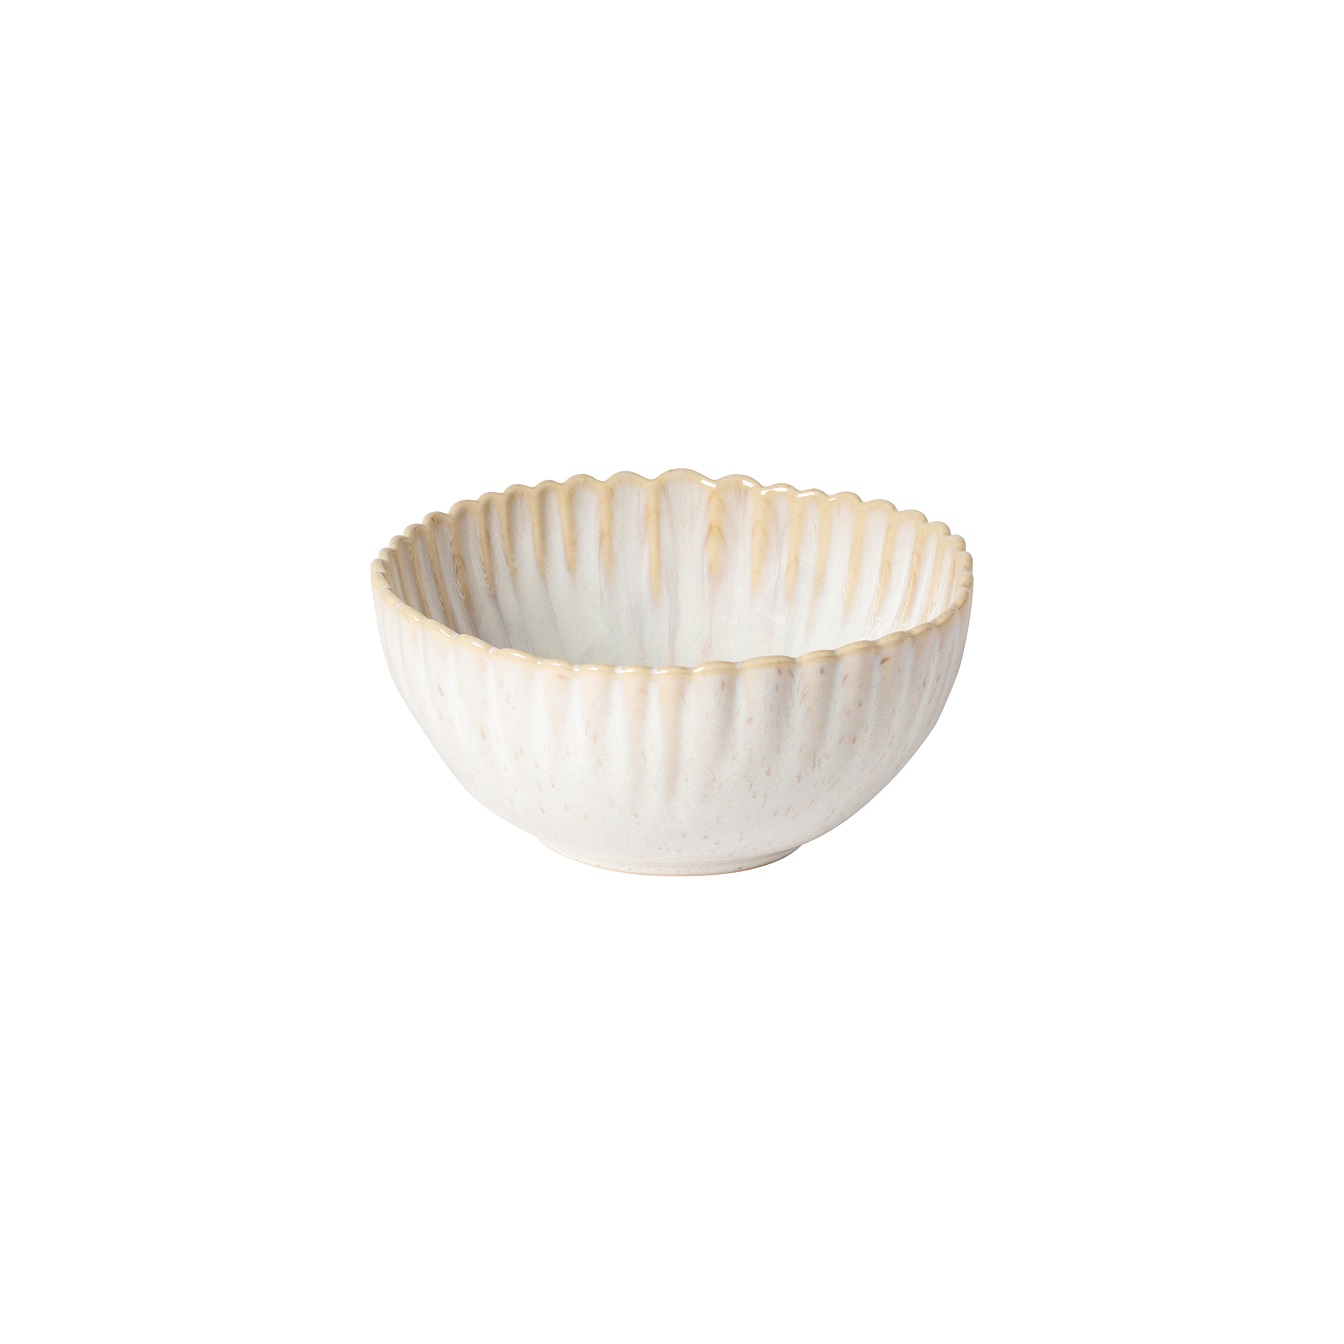 Mallorca Sand Beige Soup/cereal Bowl 16 Gift